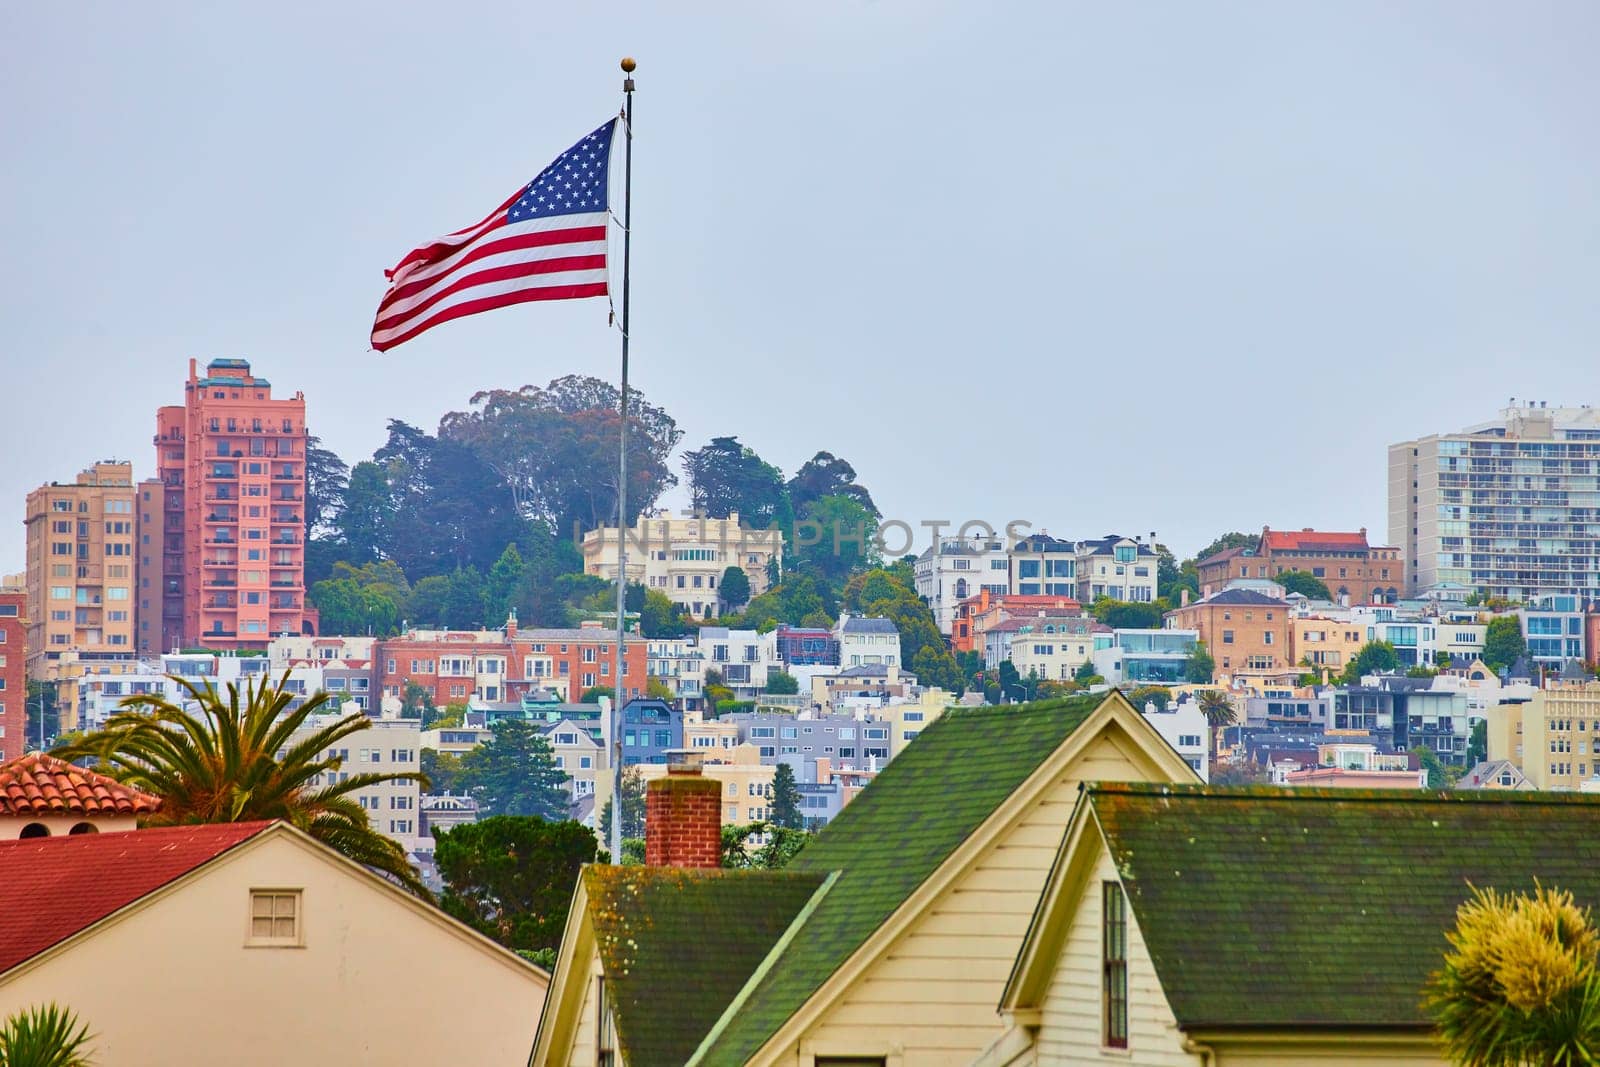 Image of American Flag waving in wind over green residential rooftops with overcast sky and city behind it